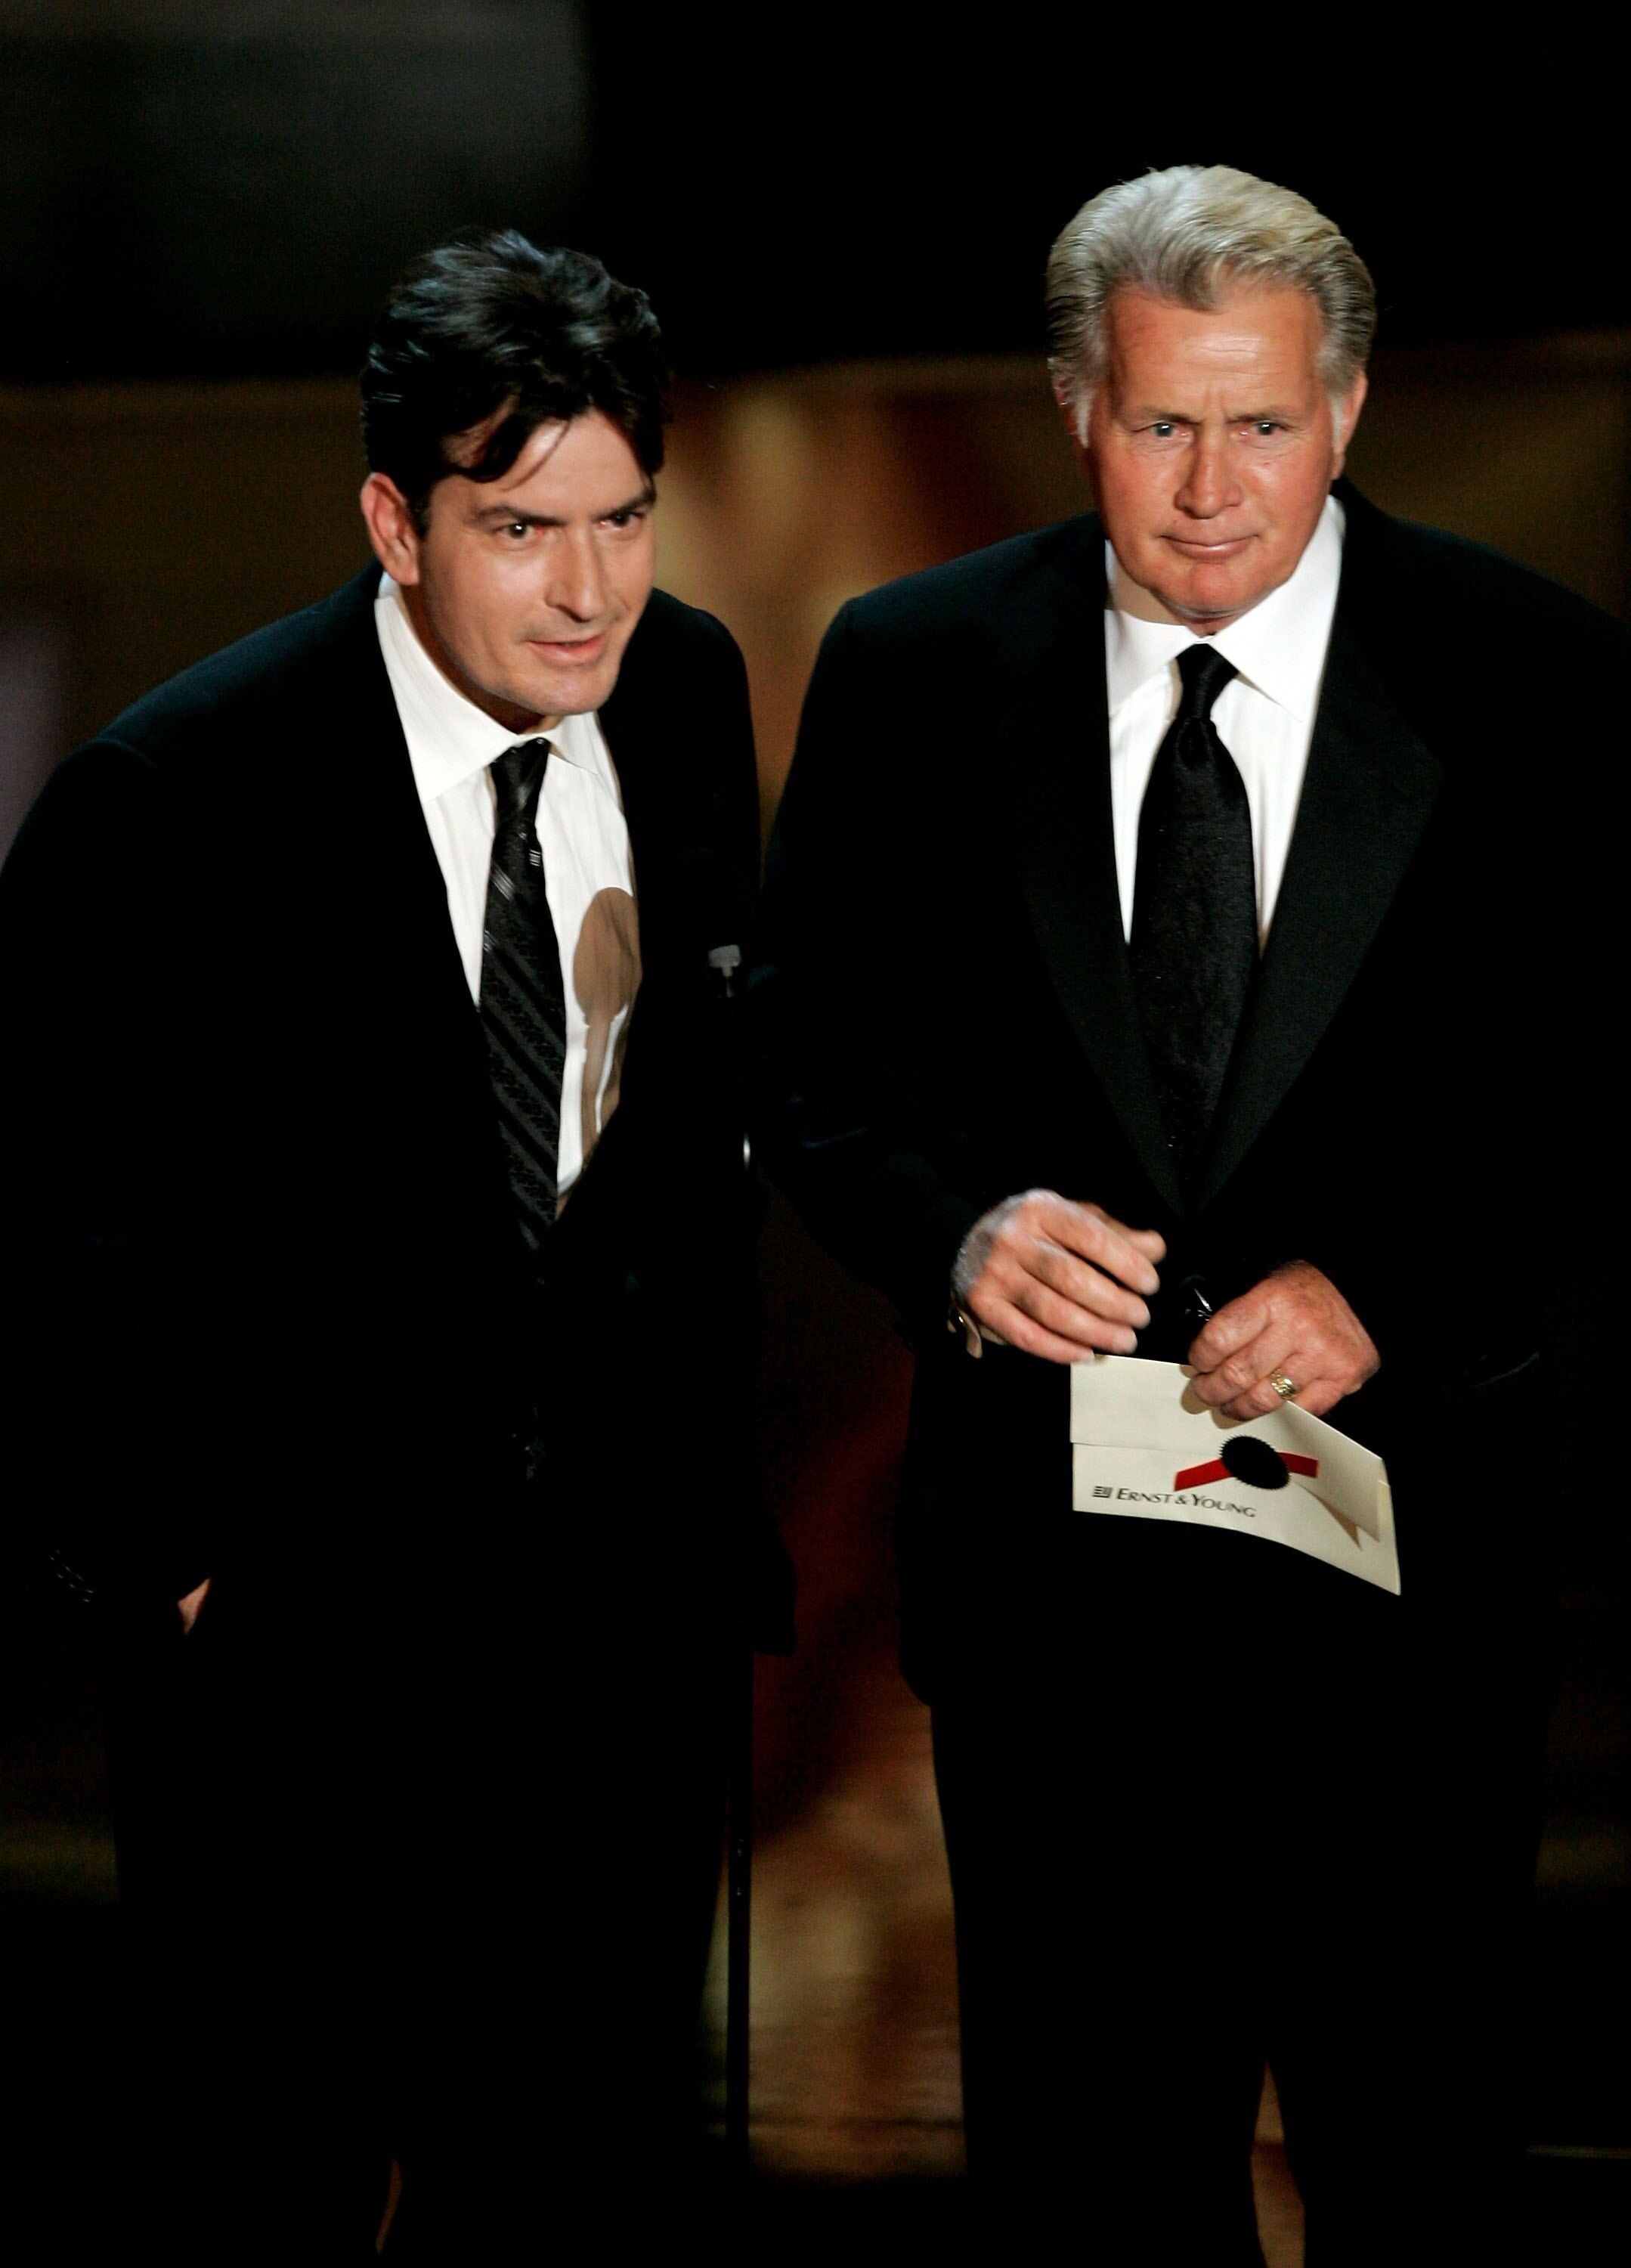 Charlie Sheen and Martin Sheen present the award for Outstanding Supporting Actress in a Drama Series onstage at the 58th Annual Primetime Emmy Awards. | Source: Getty Images